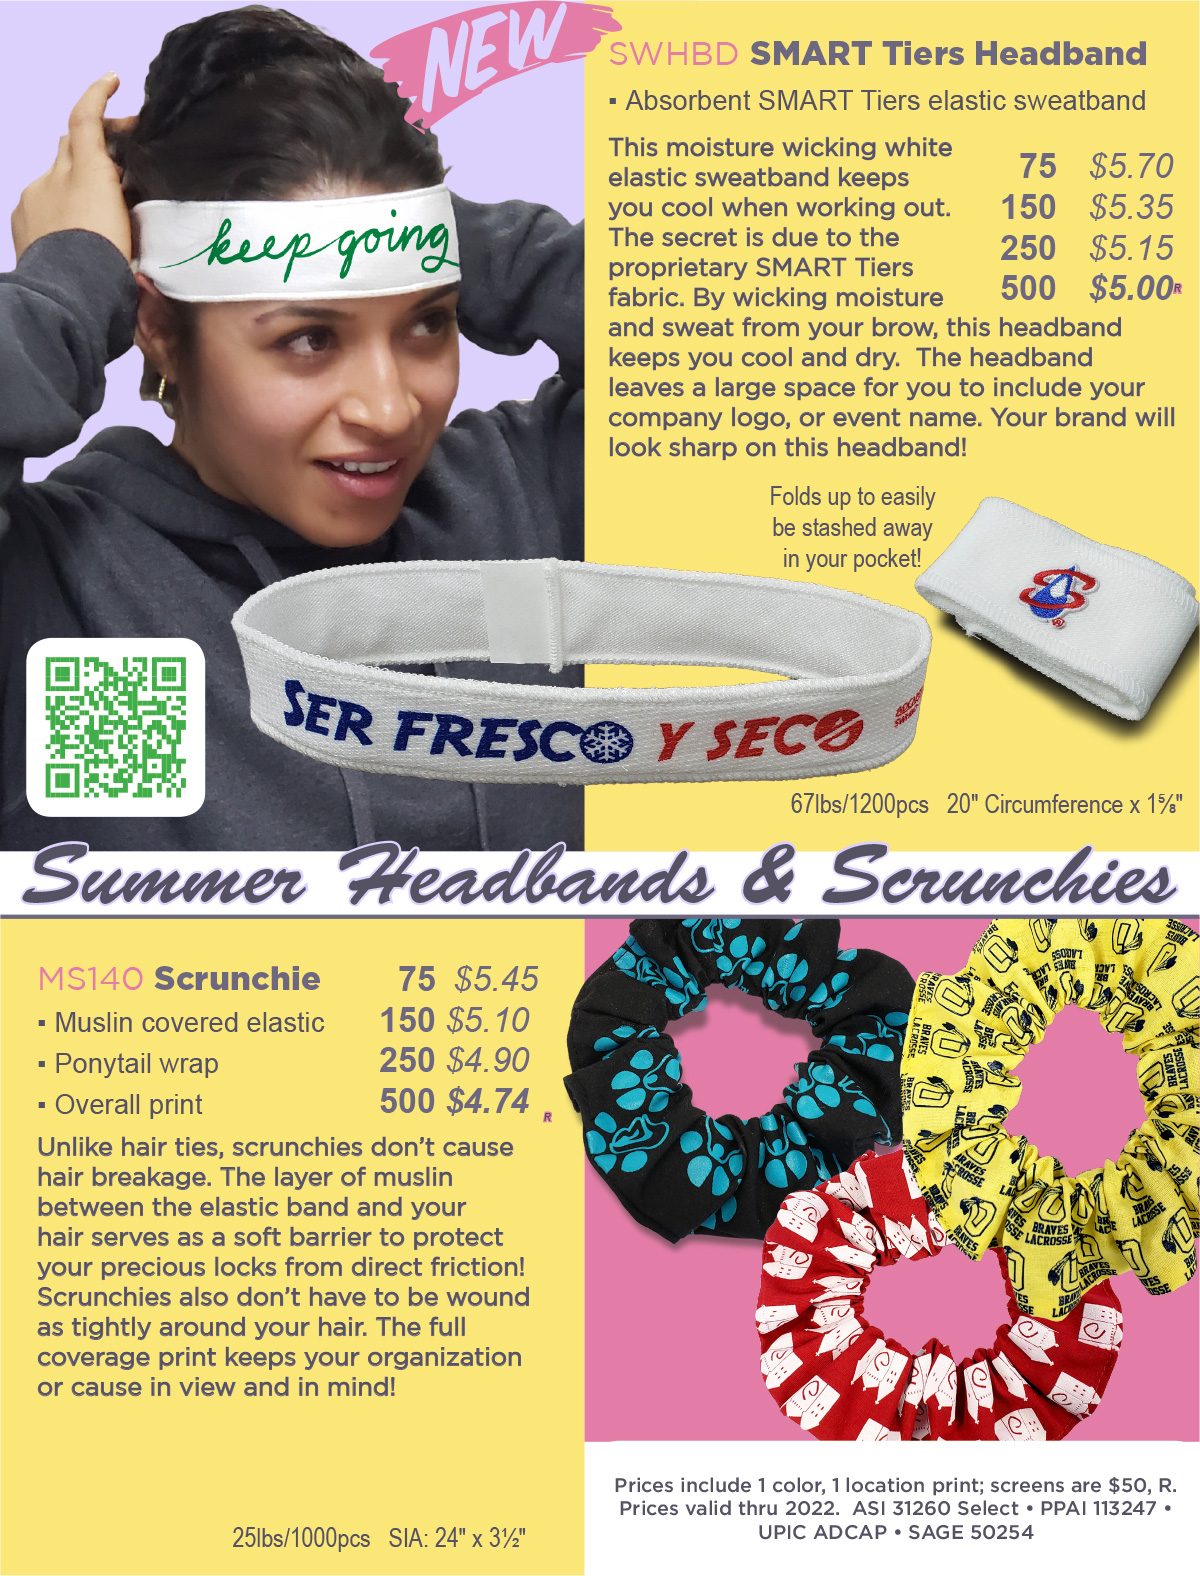 Client-Safe Ad: STHBD SMART Tiers Headband as low as $5 (R) & MS140 Scrunchies as low as $4.74 (R)